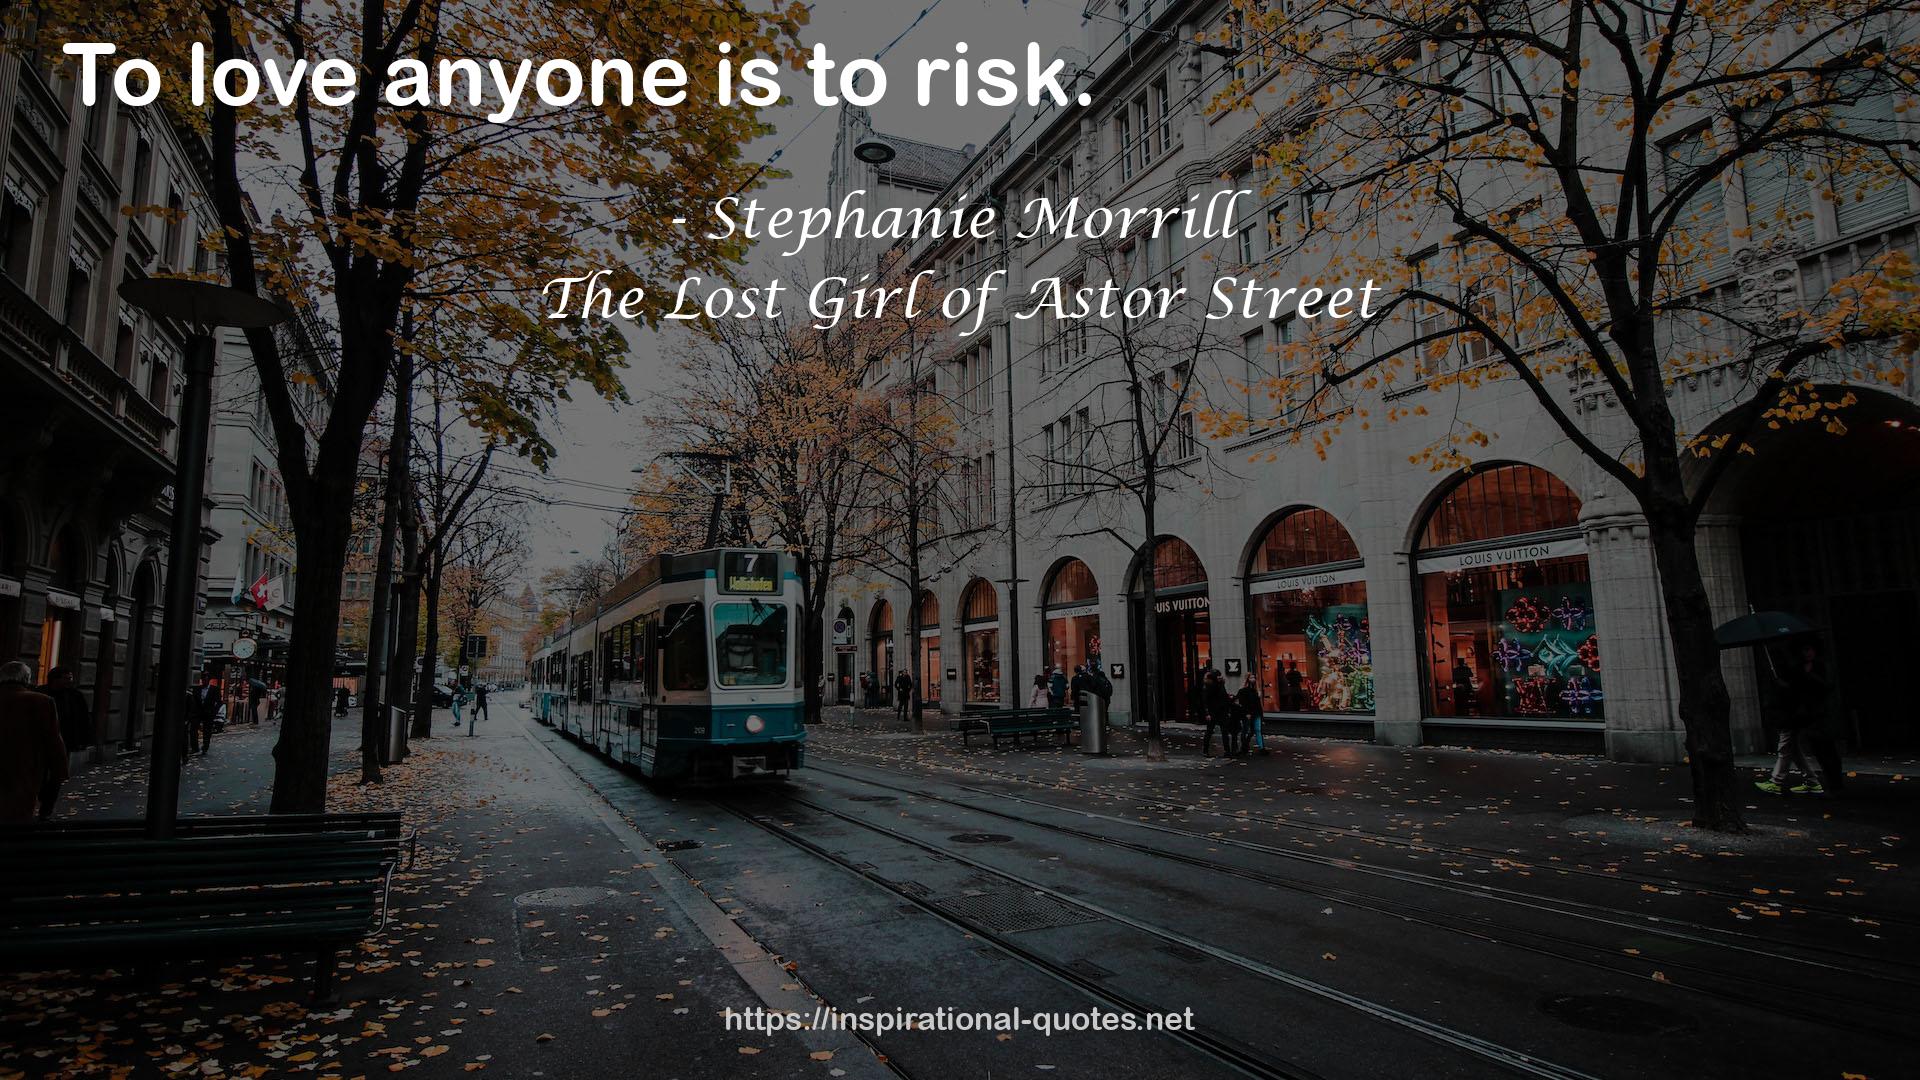 The Lost Girl of Astor Street QUOTES